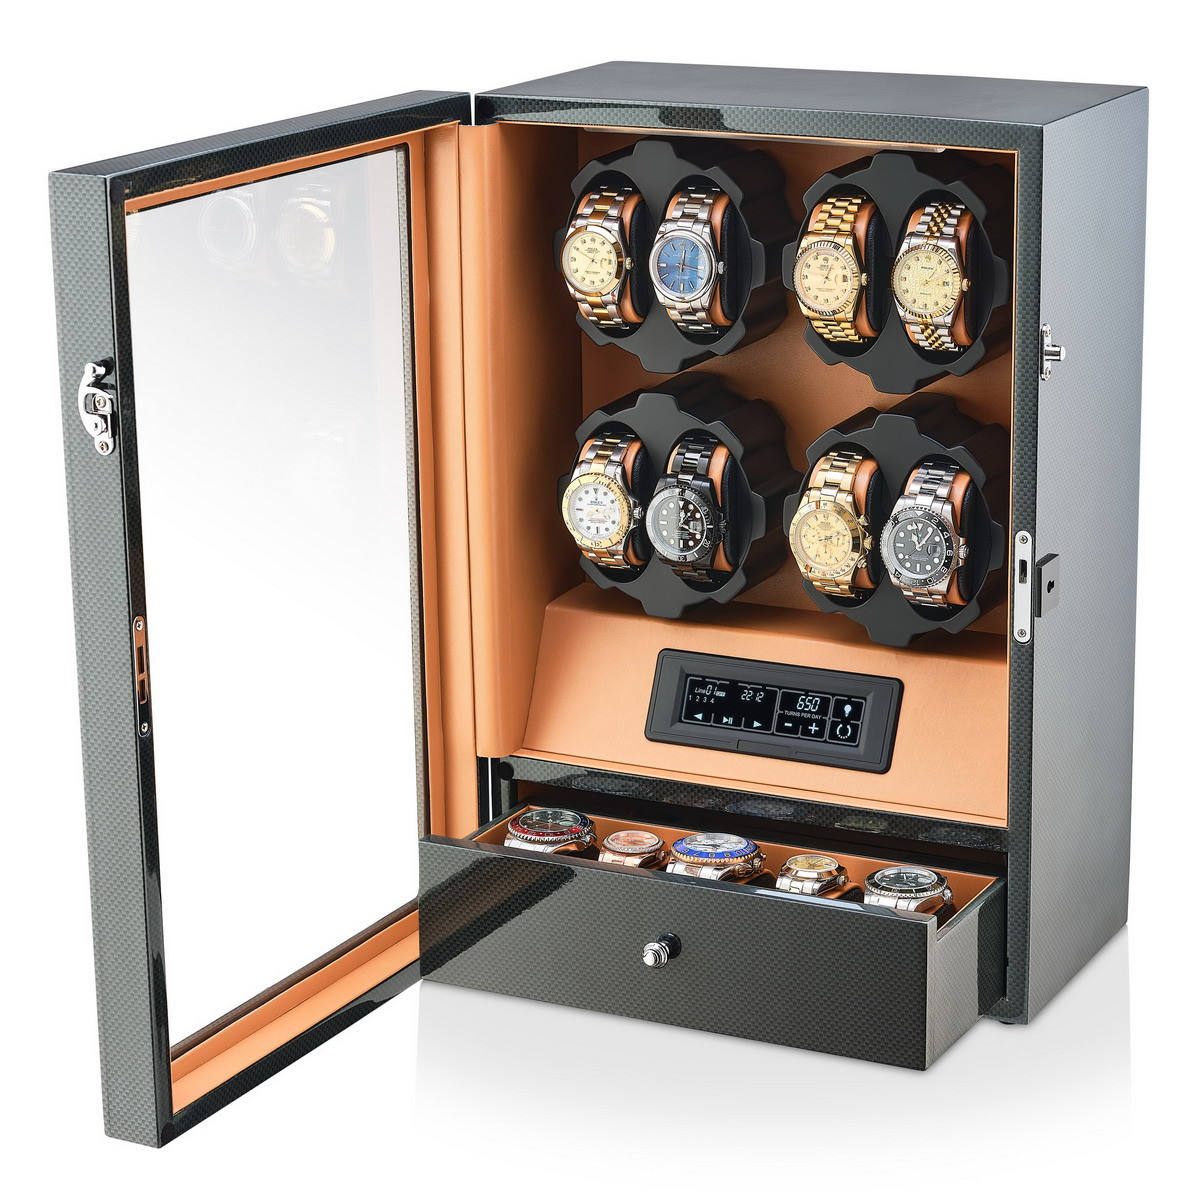 Watch Winder X206TBr for 8 Automatic Watches with LED Backlight, LCD